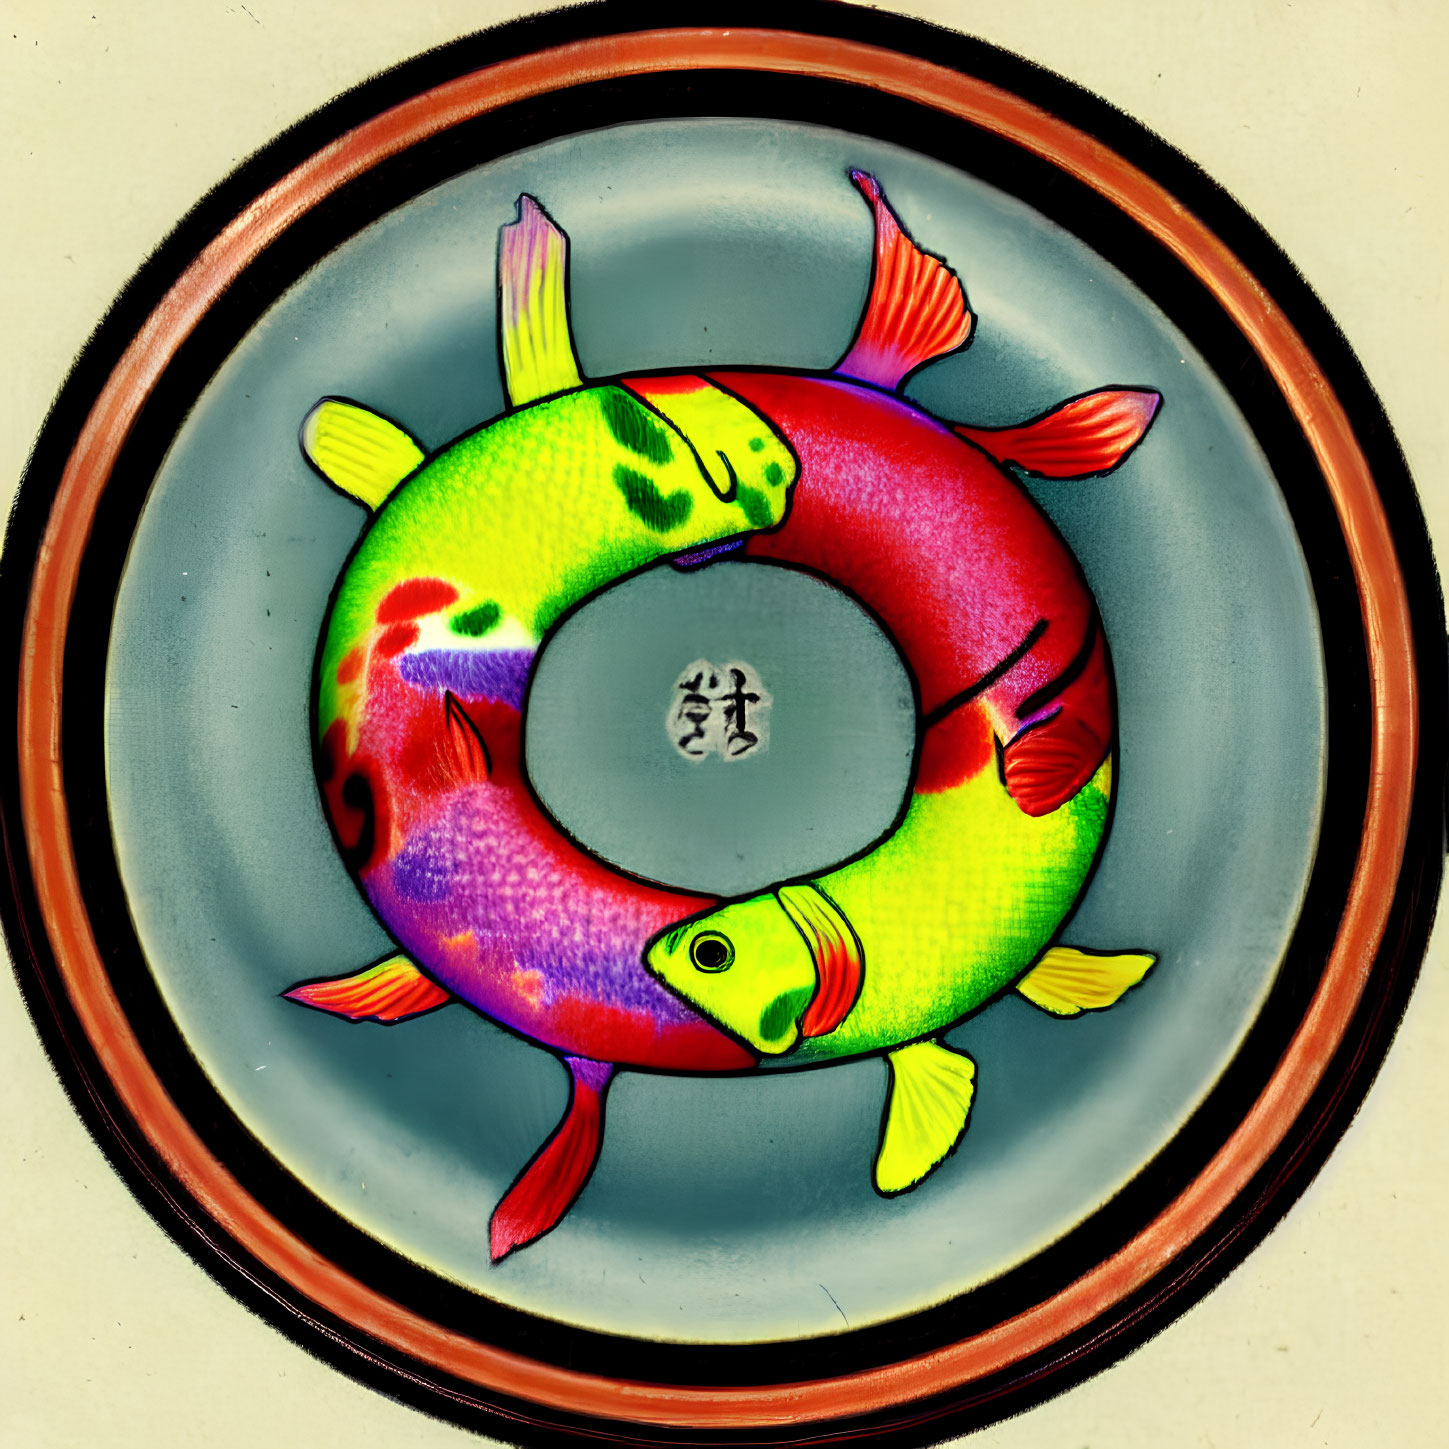 Vibrant koi fish lifebuoy illustration with oriental characters on beige background